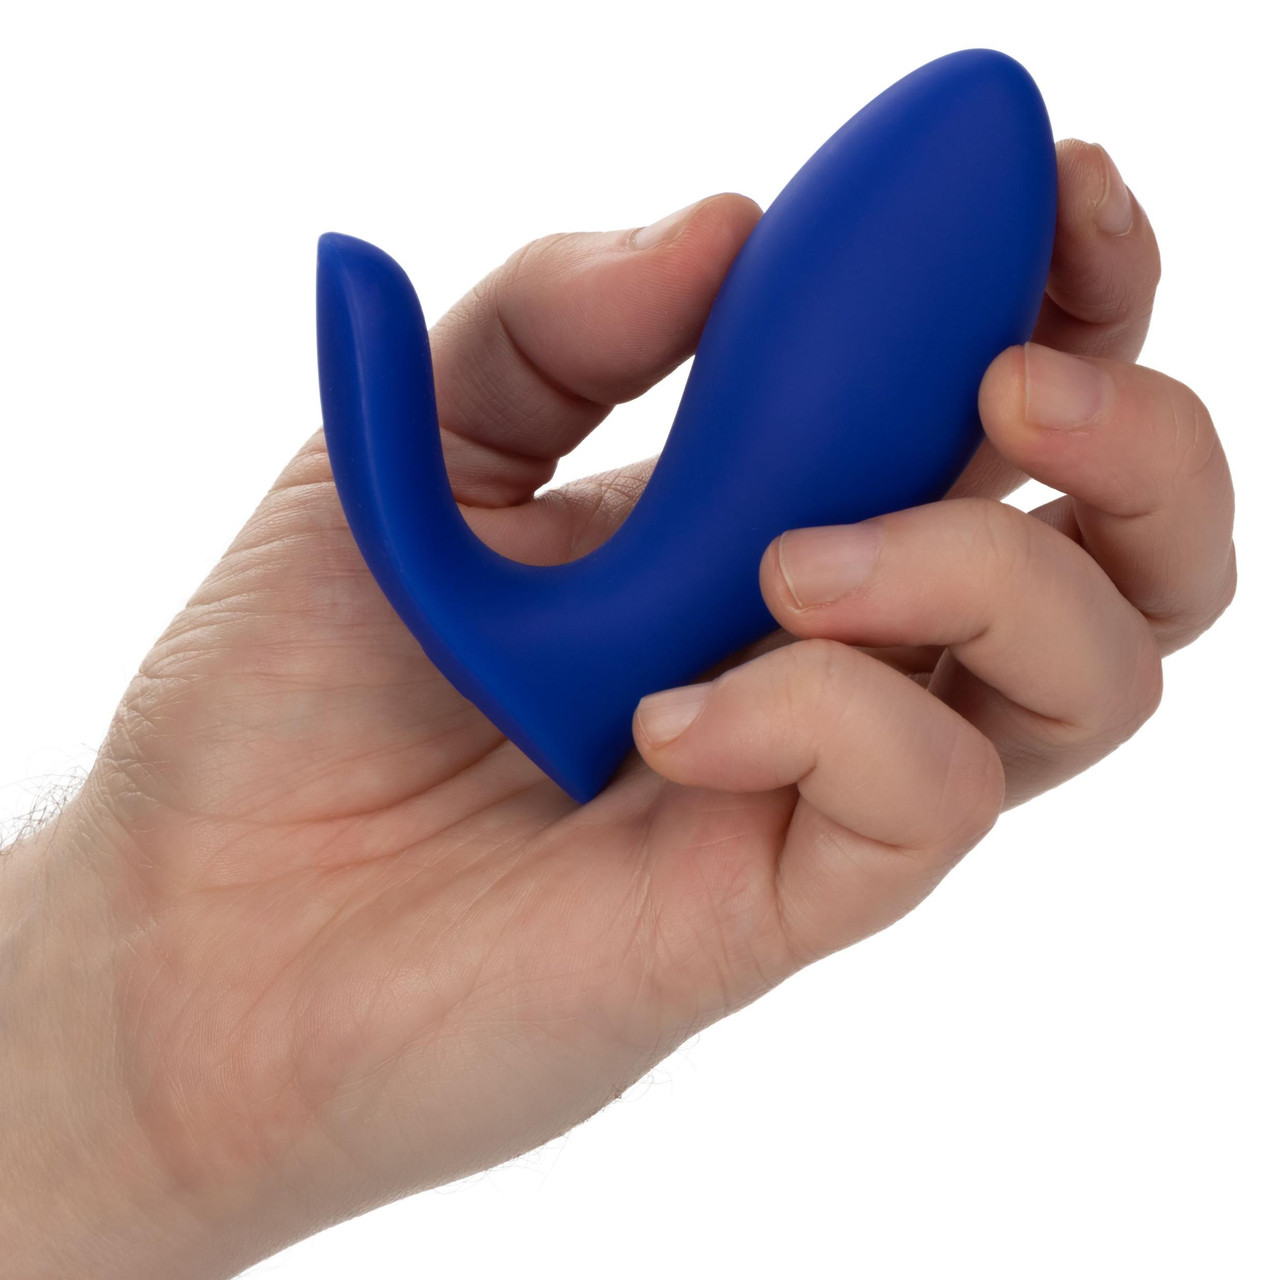 Admiral Prostate Rimming Probe | Buy prostate massagers for men online from Condom Depot